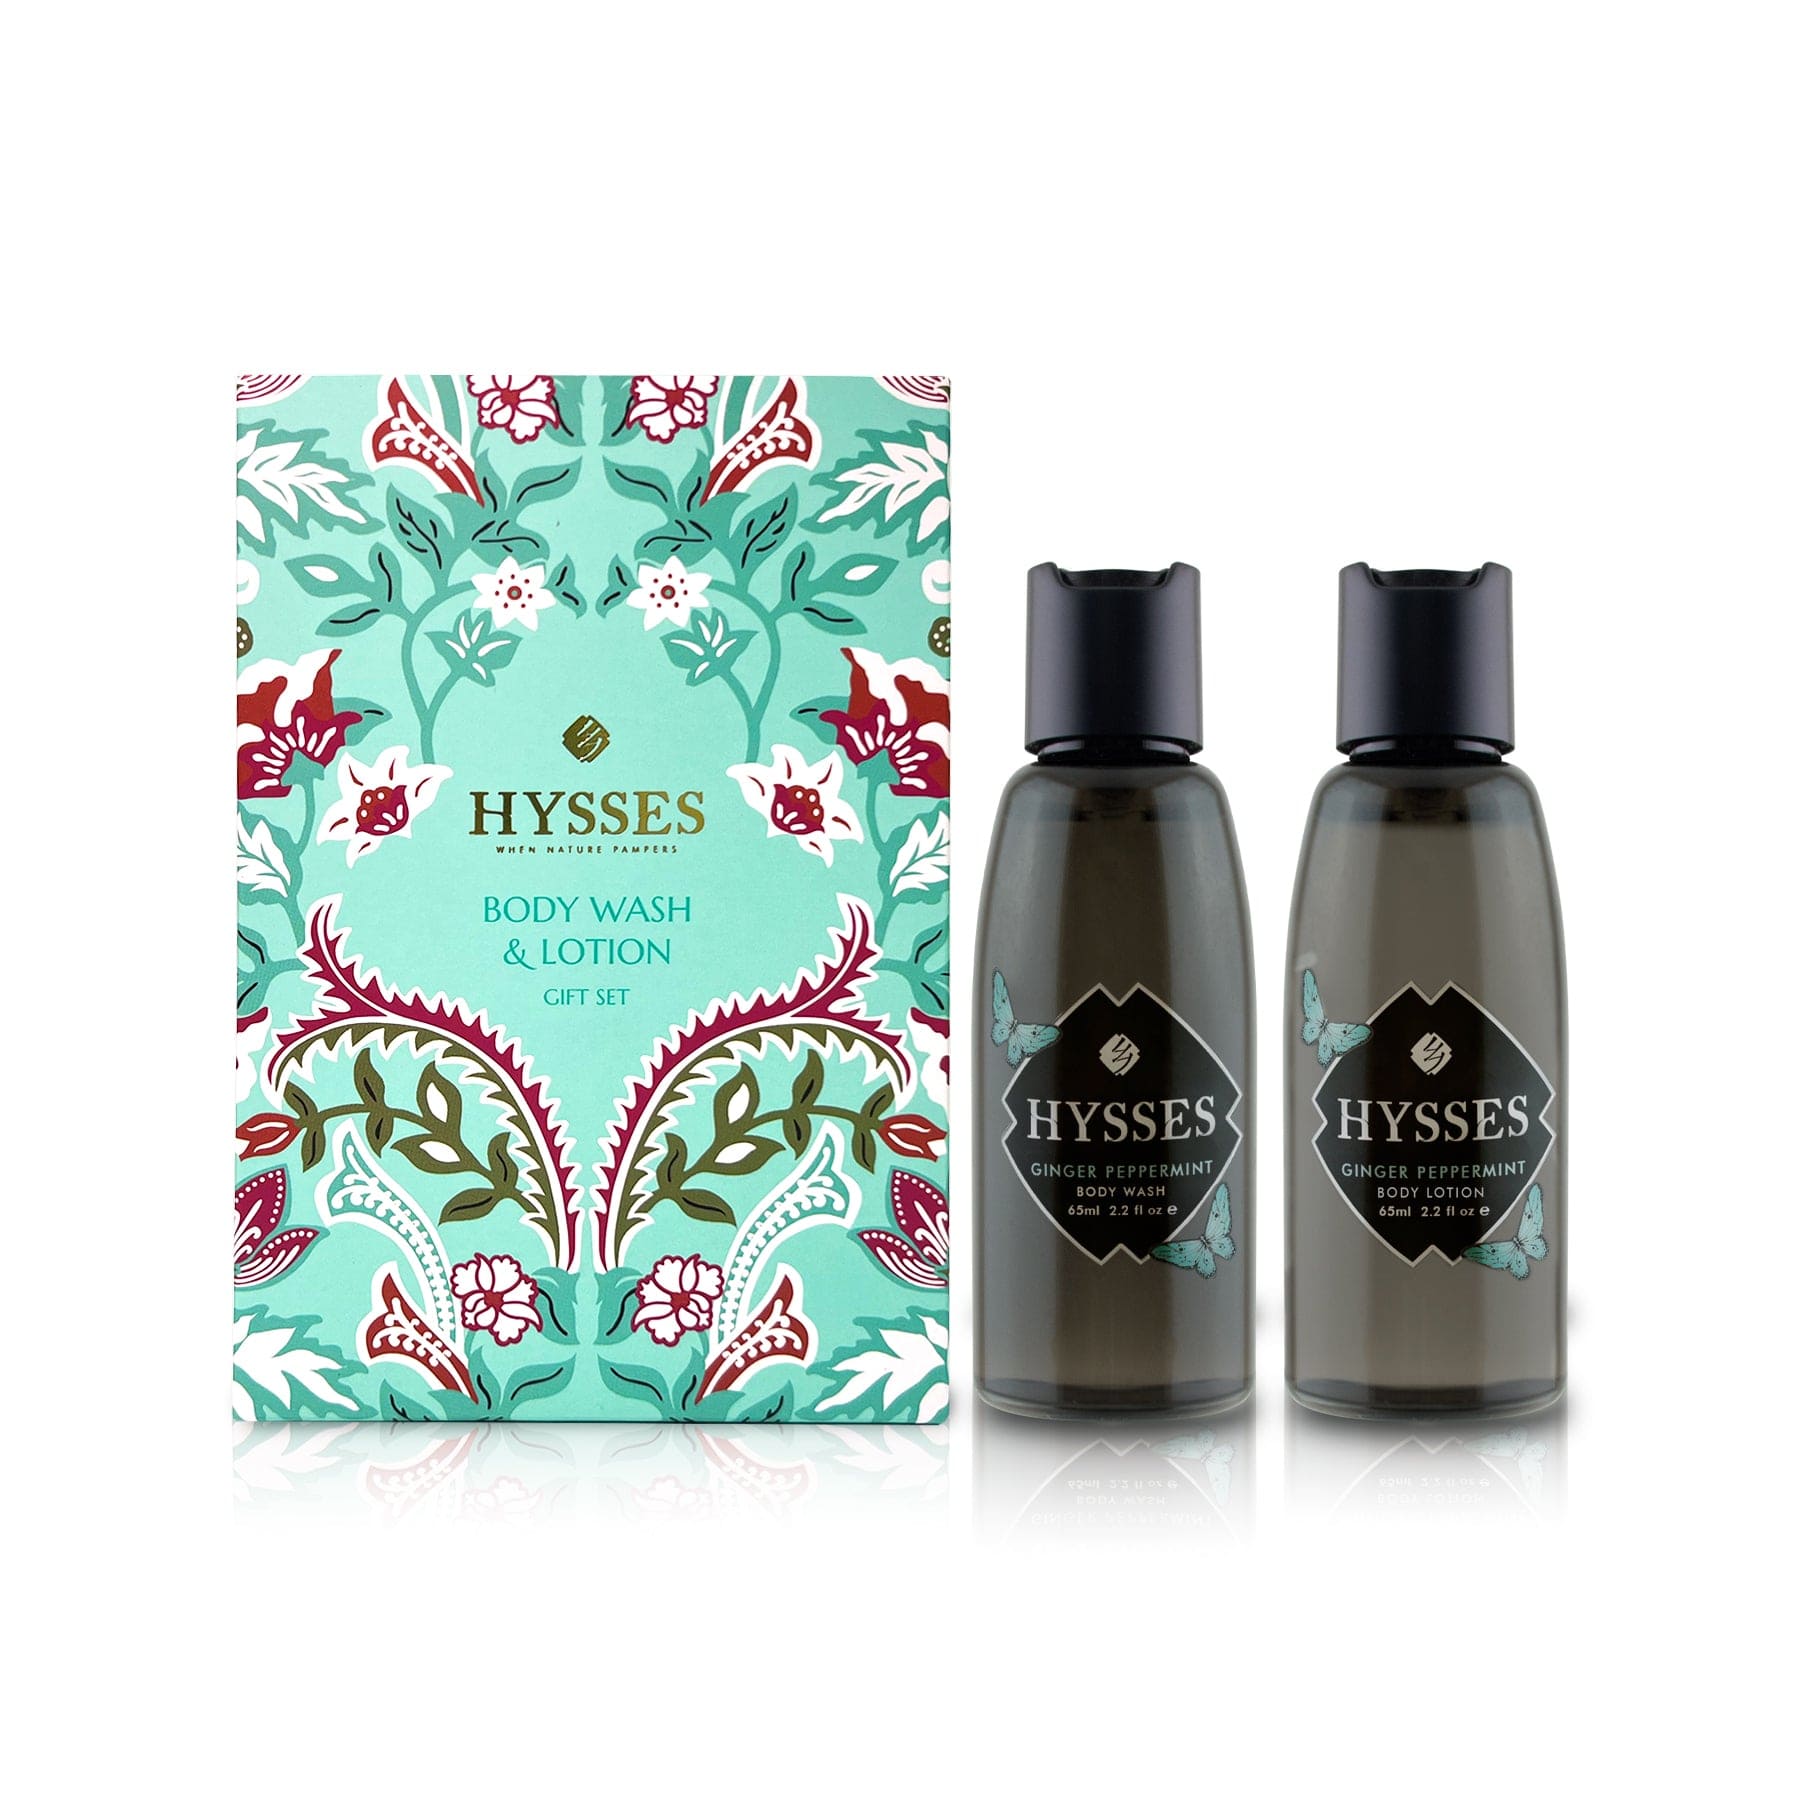 Hysses Body Care Lavender Chamomile Travel Gift Set (Body Wash & Body Lotion)